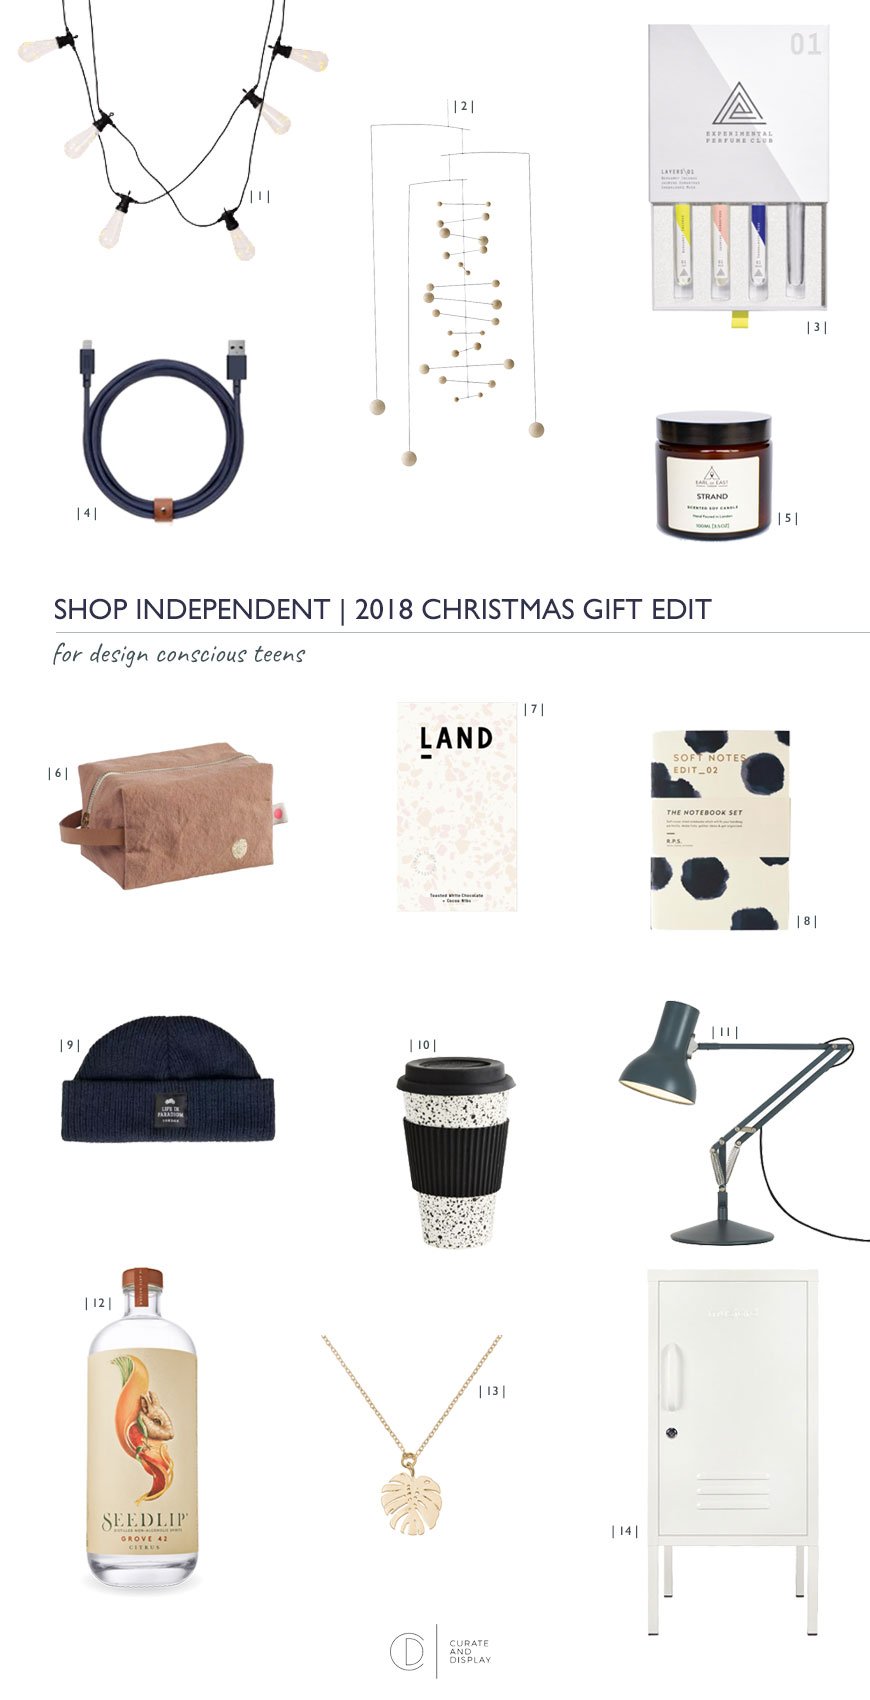 shop independent and support small shops in this Christmas gift guide for teens who are design conscious